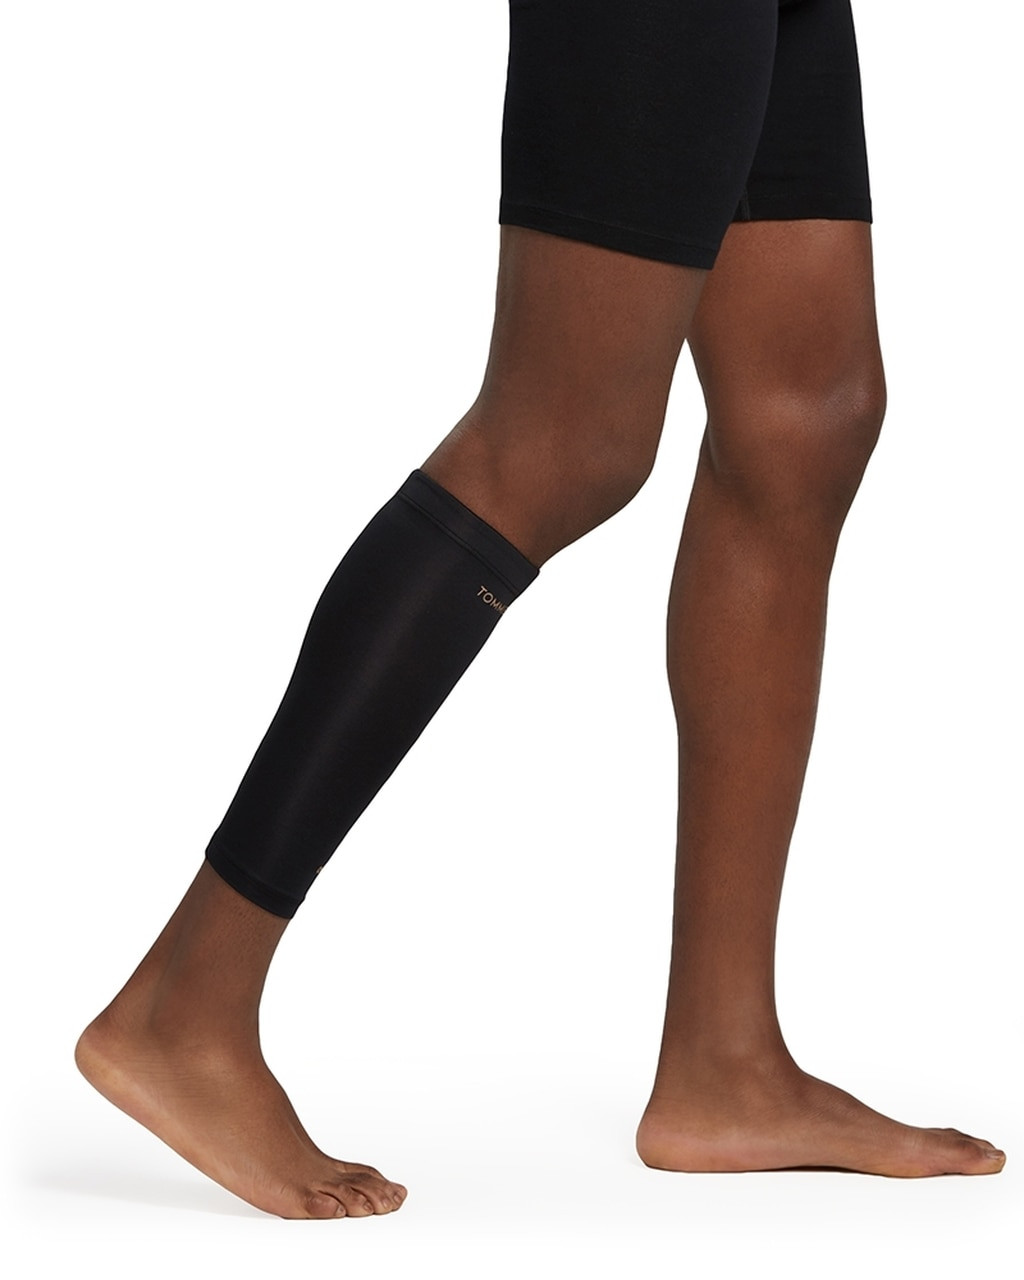 Copper Calf Leg Knee Support Brace Compression Sleeve Sock Varicose Veins  Relief